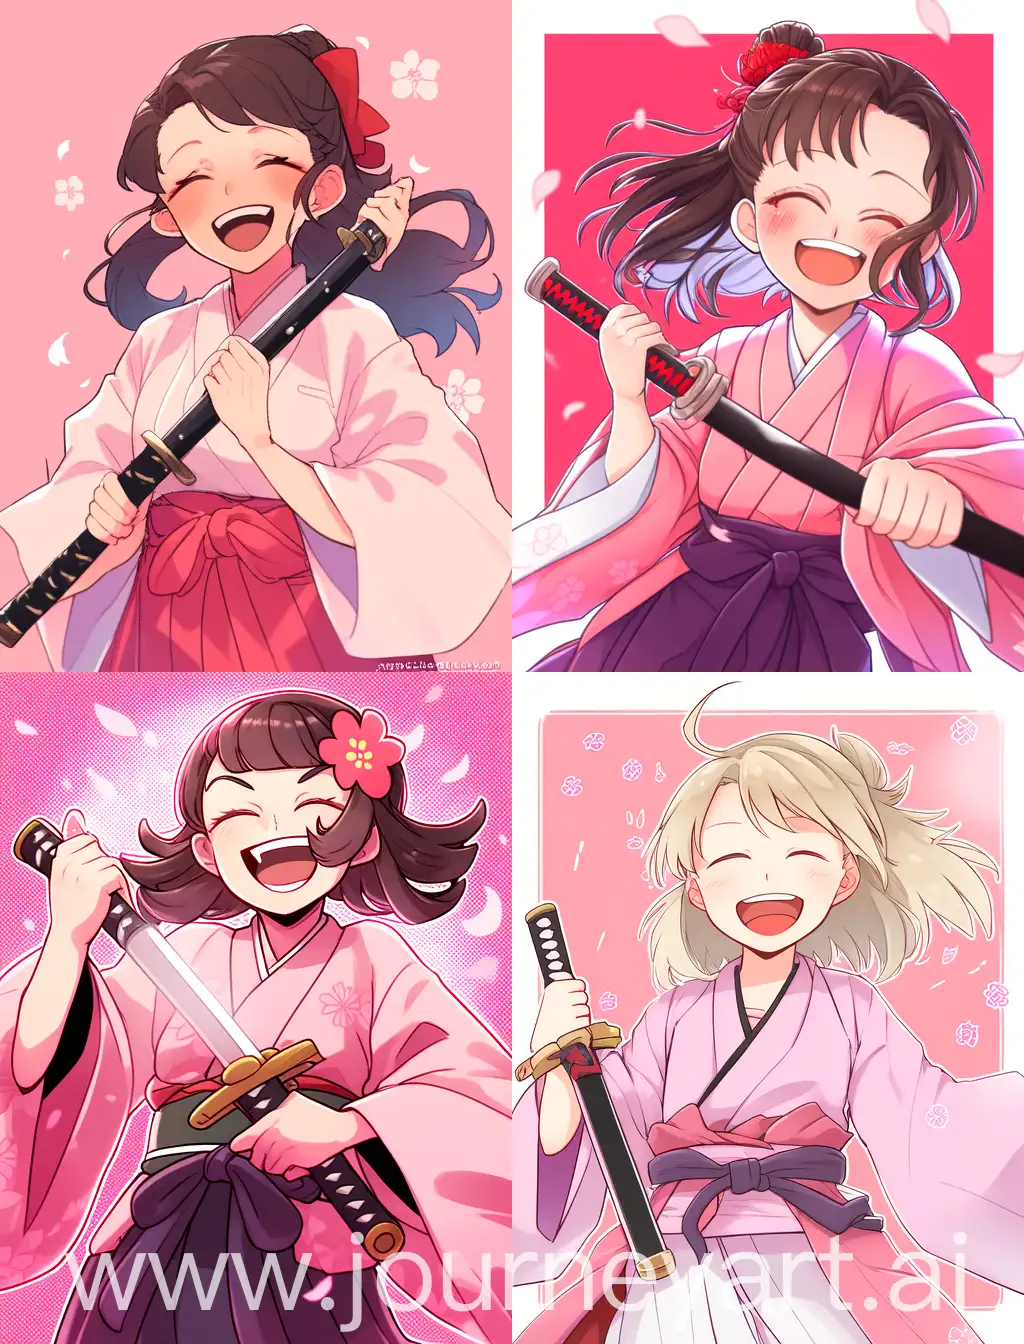 A girl with kimono laughing, holding a katana, pink background